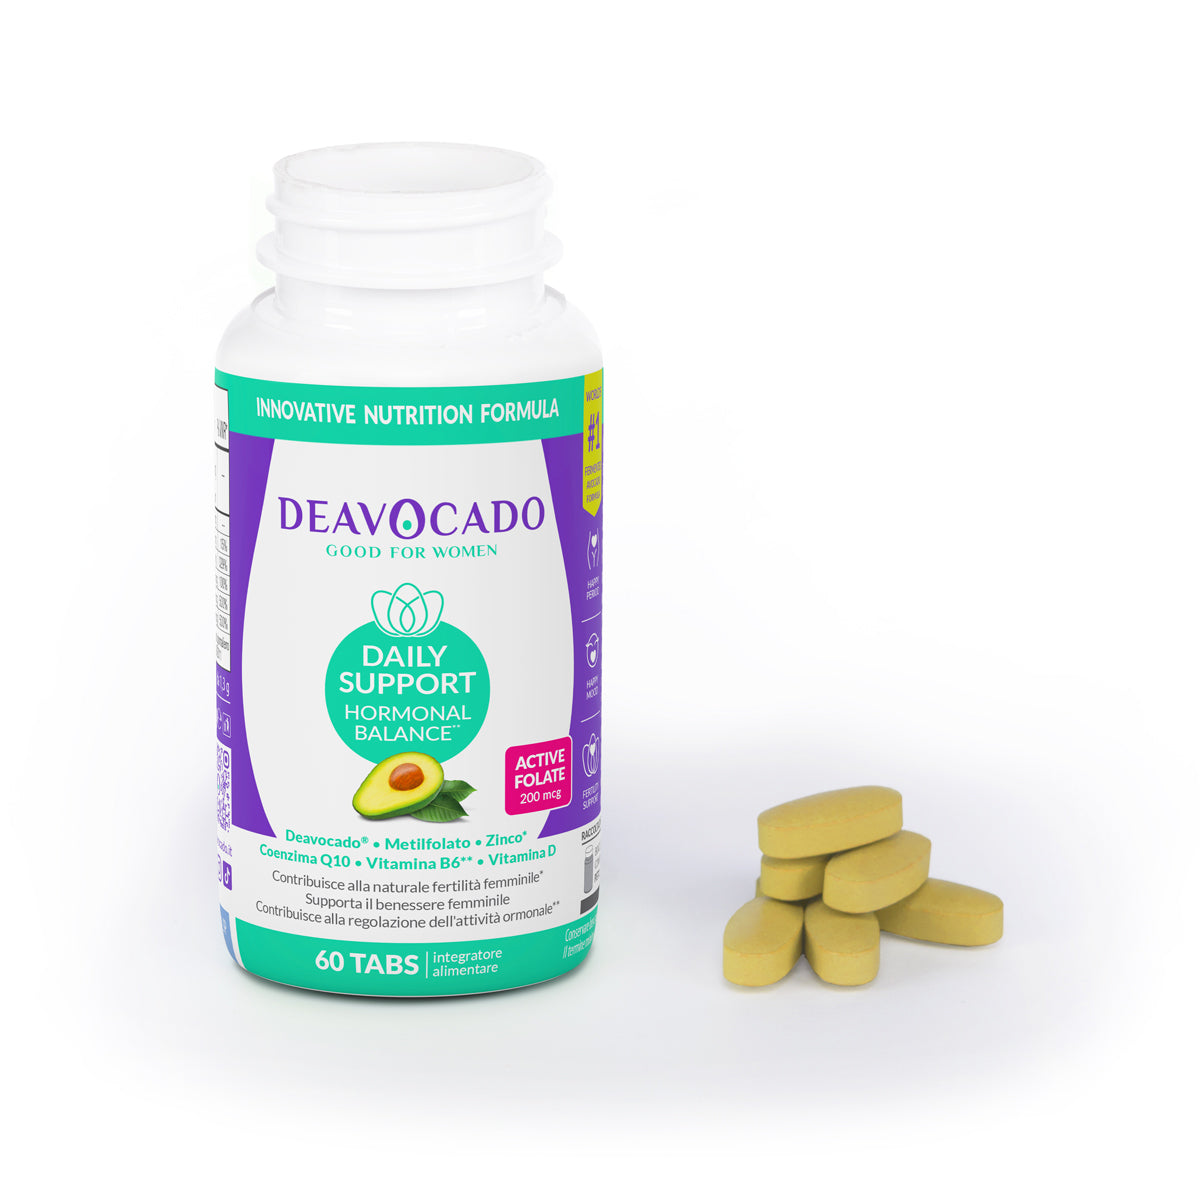 DAILY SUPPORT HORMONAL BALANCE